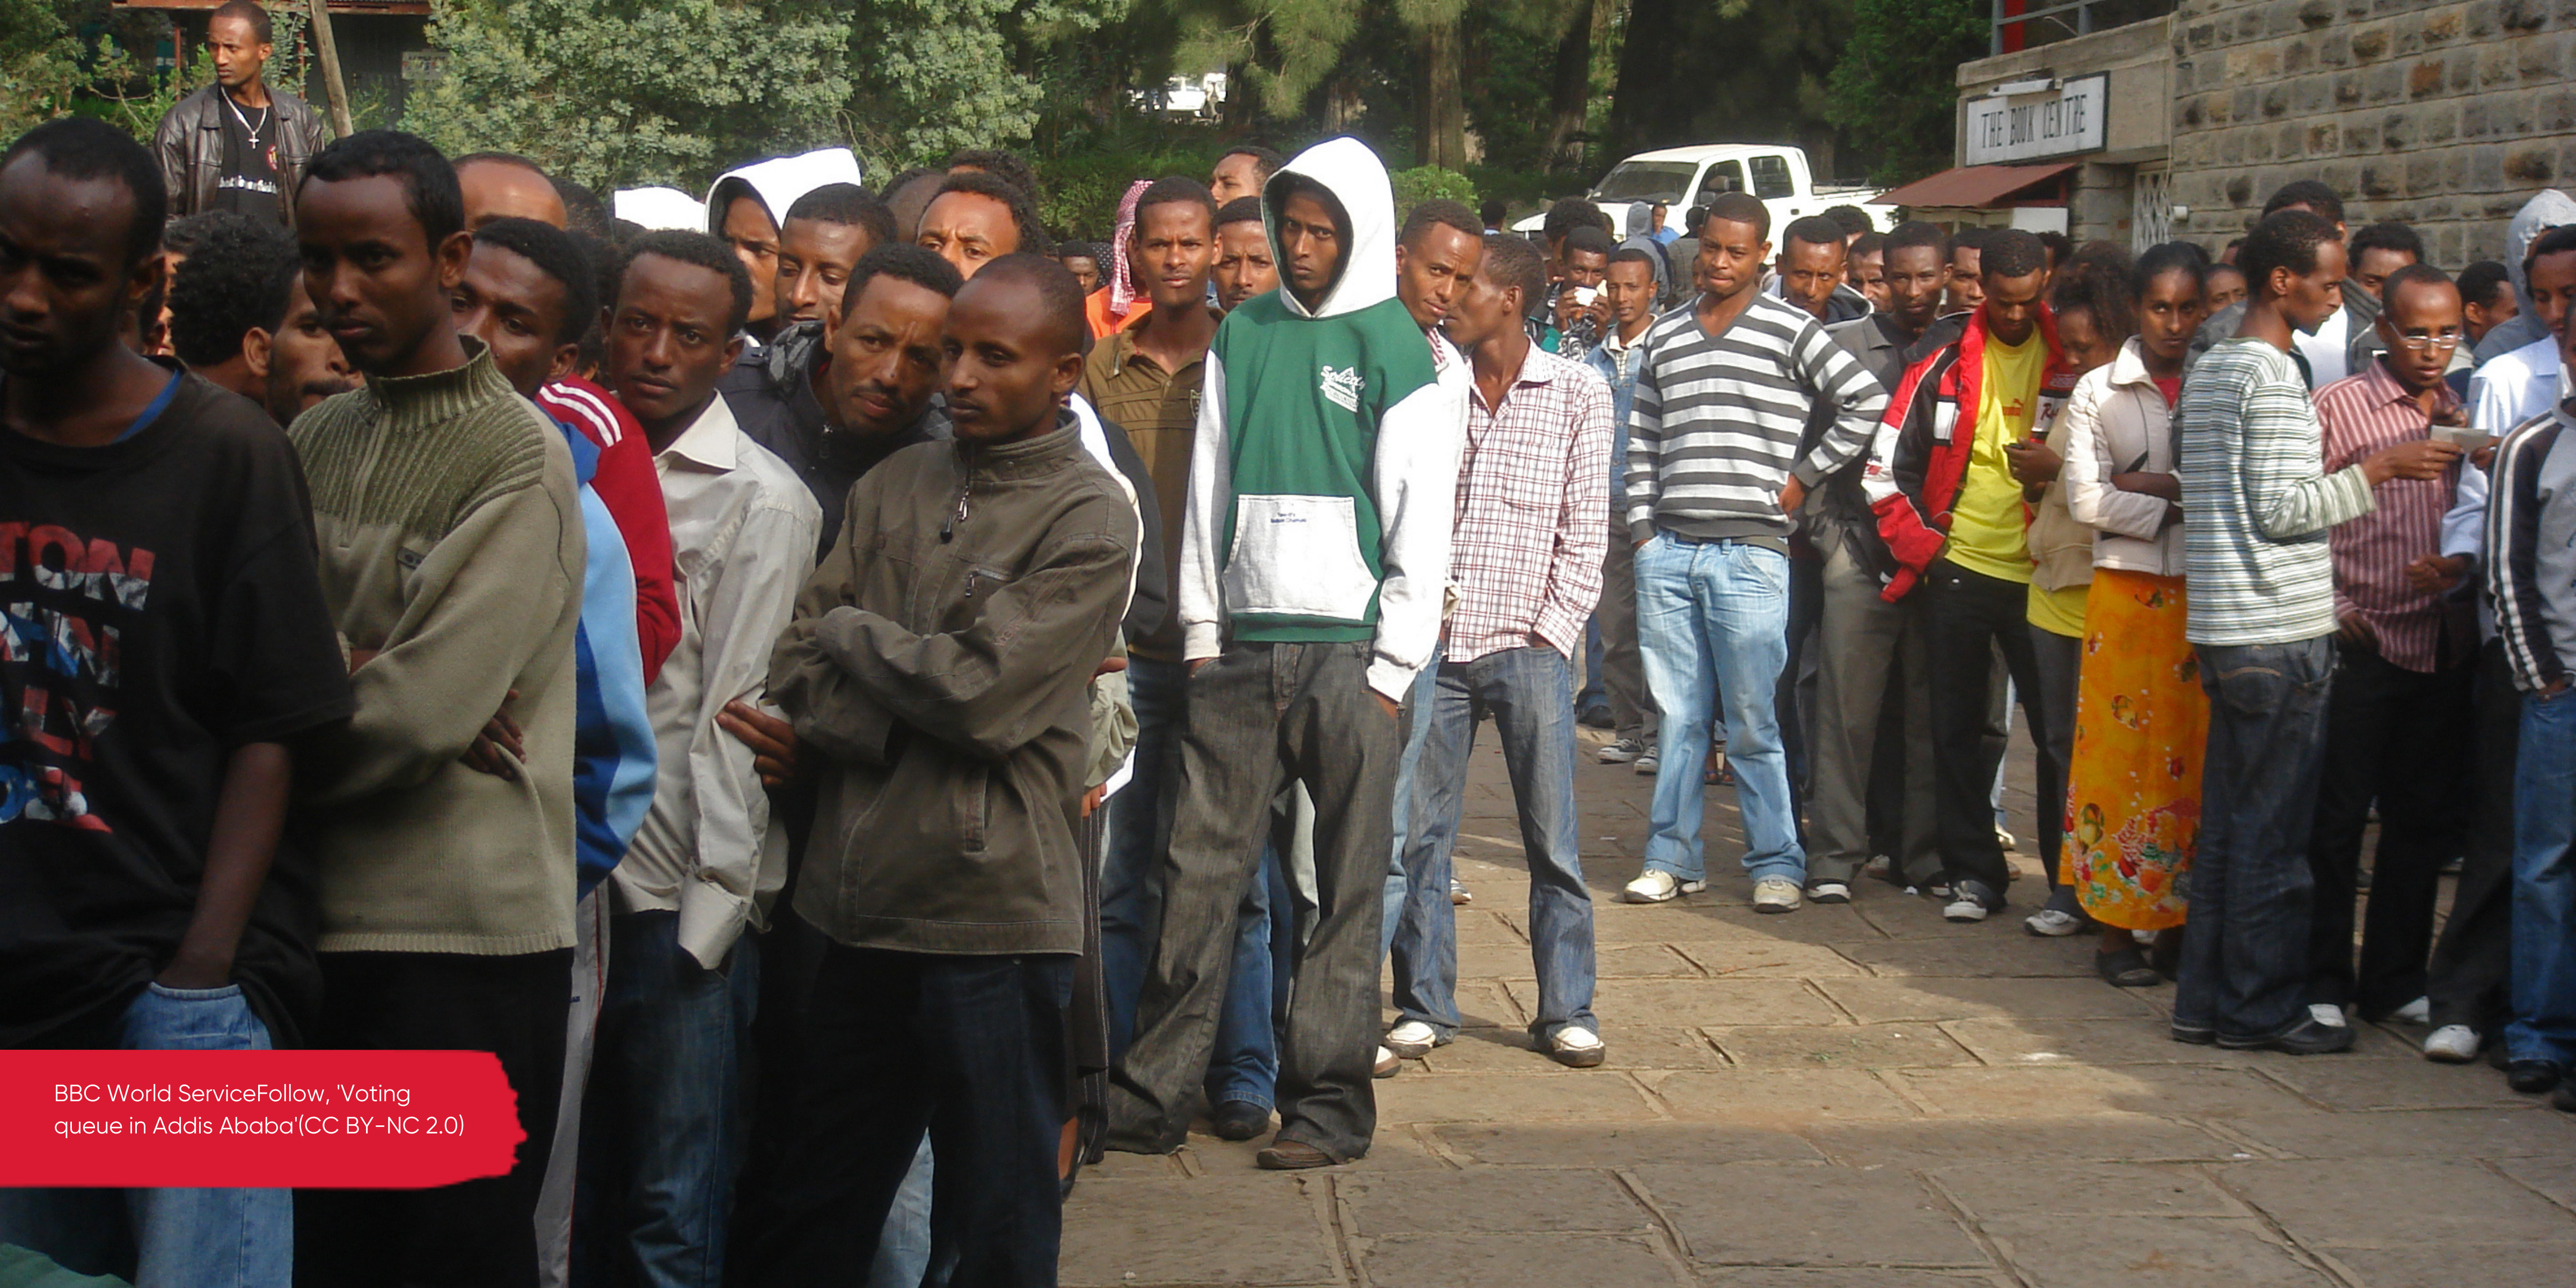 BBC World ServiceFollow, 'Voting queue in Addis Ababa'(CC BY-NC 2.0)